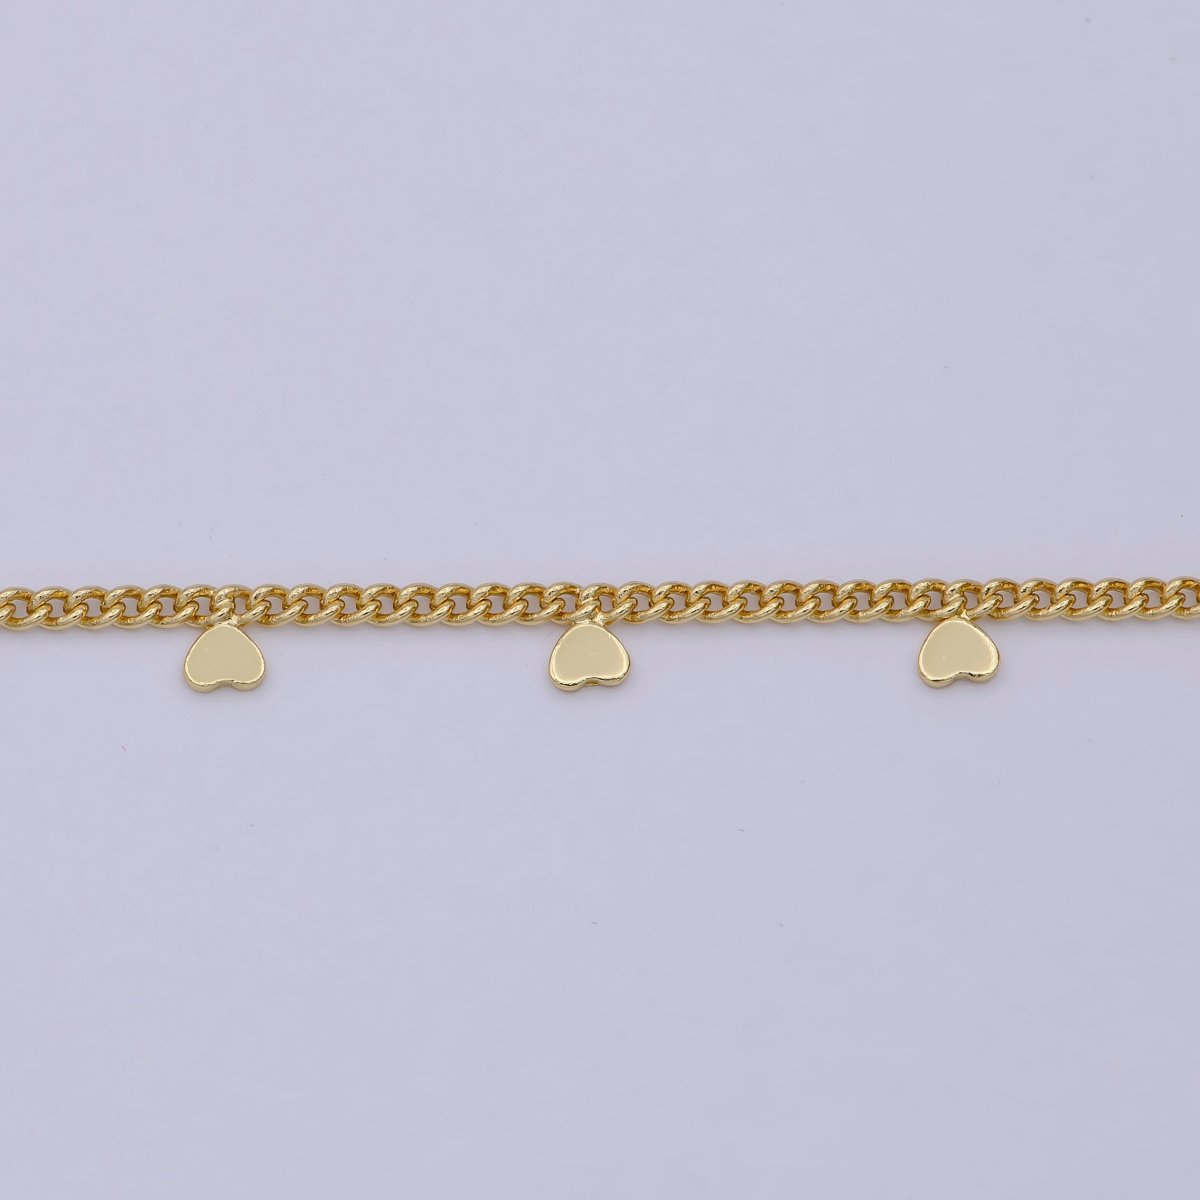 24K Gold Filled Dainty 1.6mm Curb Chain with Hearts Charm, Rhodium Plated Unique Curb by Yard, Unfinished Chain For Jewelry Making | ROLL-645, ROLL-646 Clearance Pricing - DLUXCA